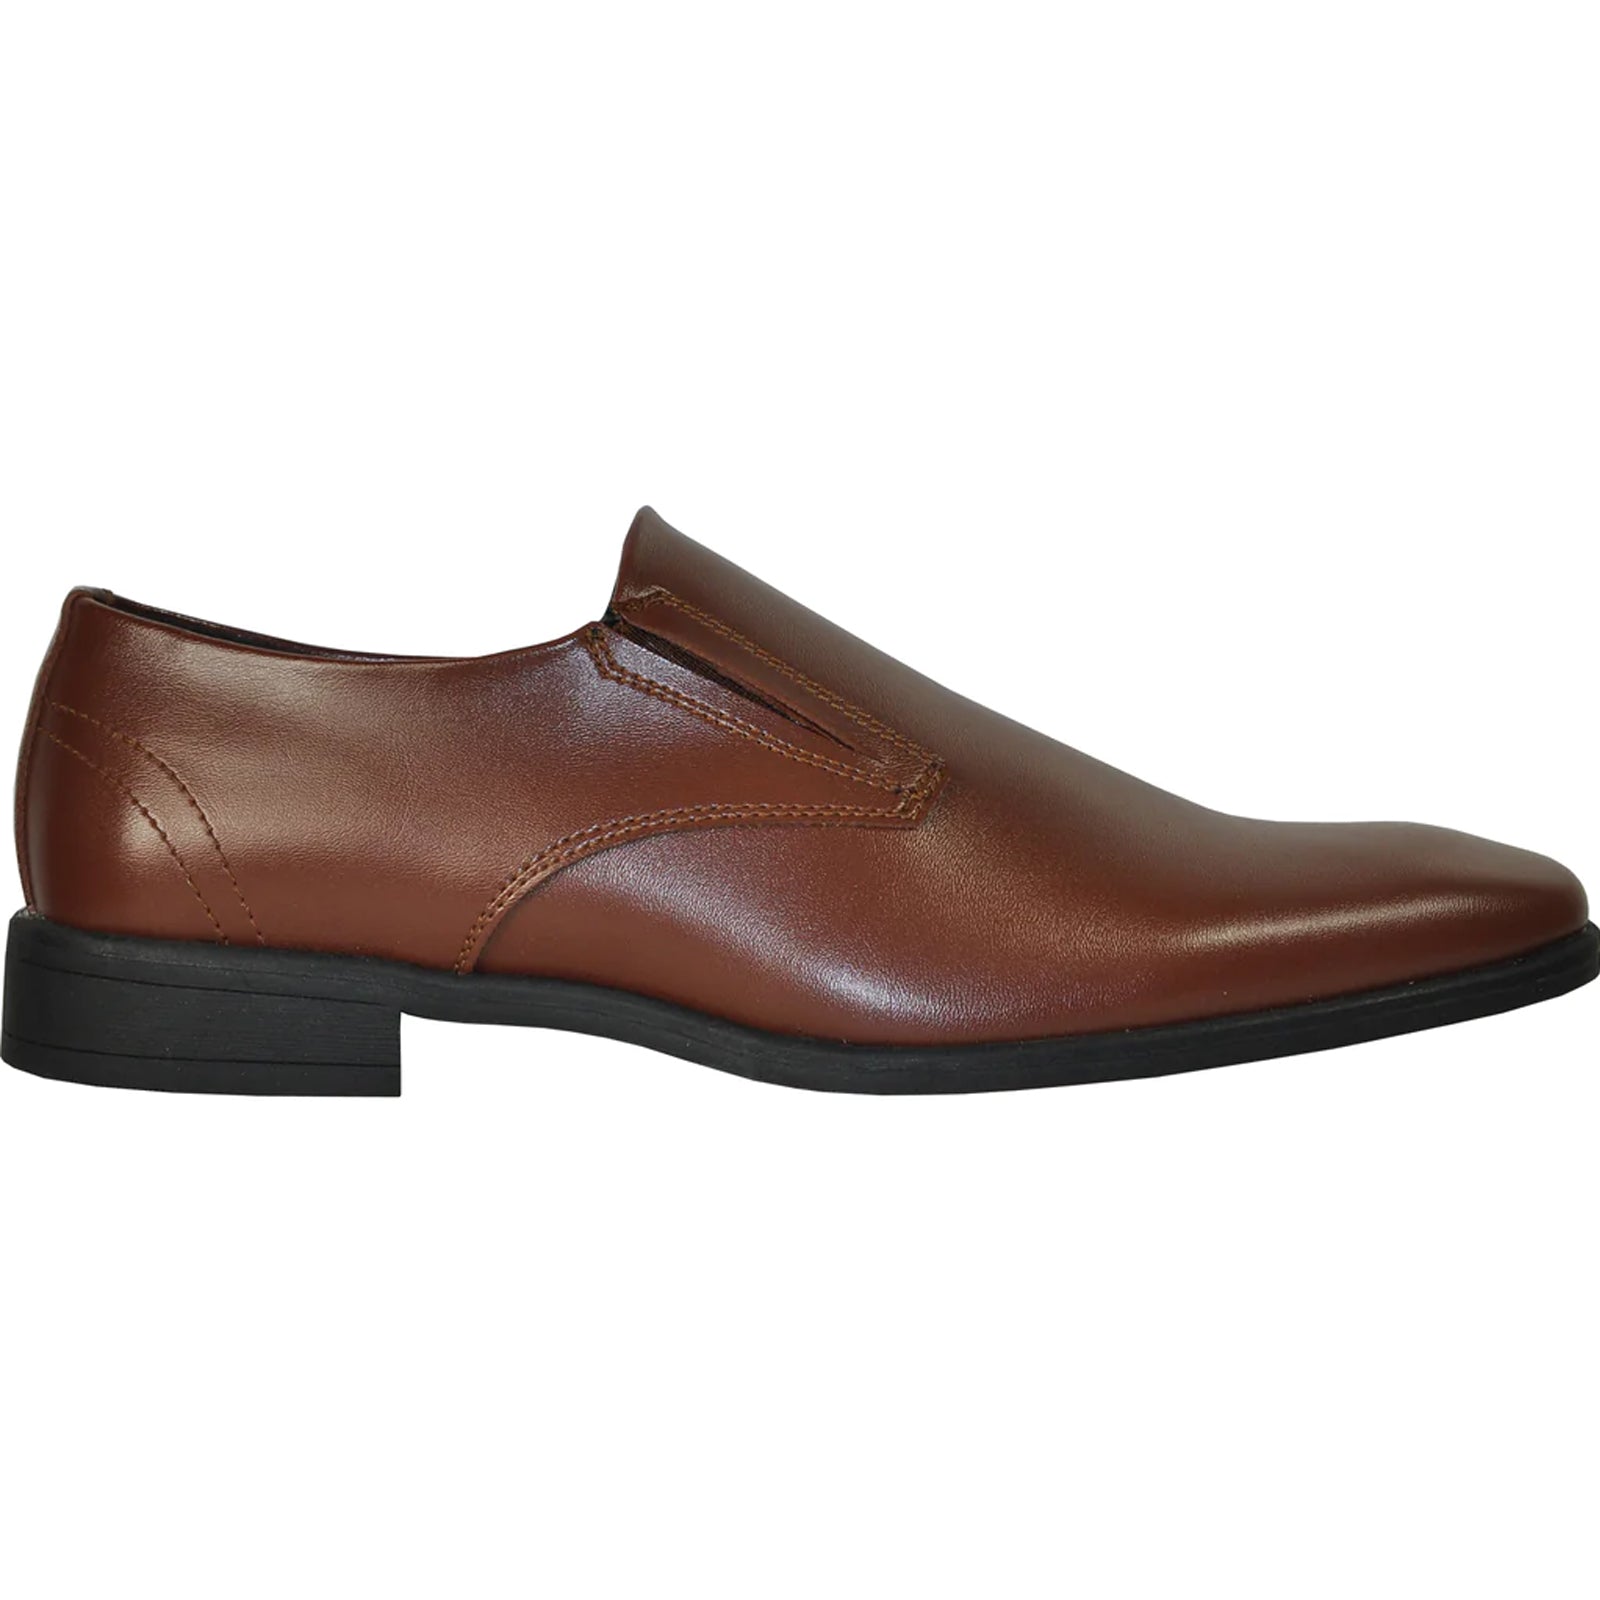 "Brown Men's Dress Loafer - Plain Pointy Square Toe Style"